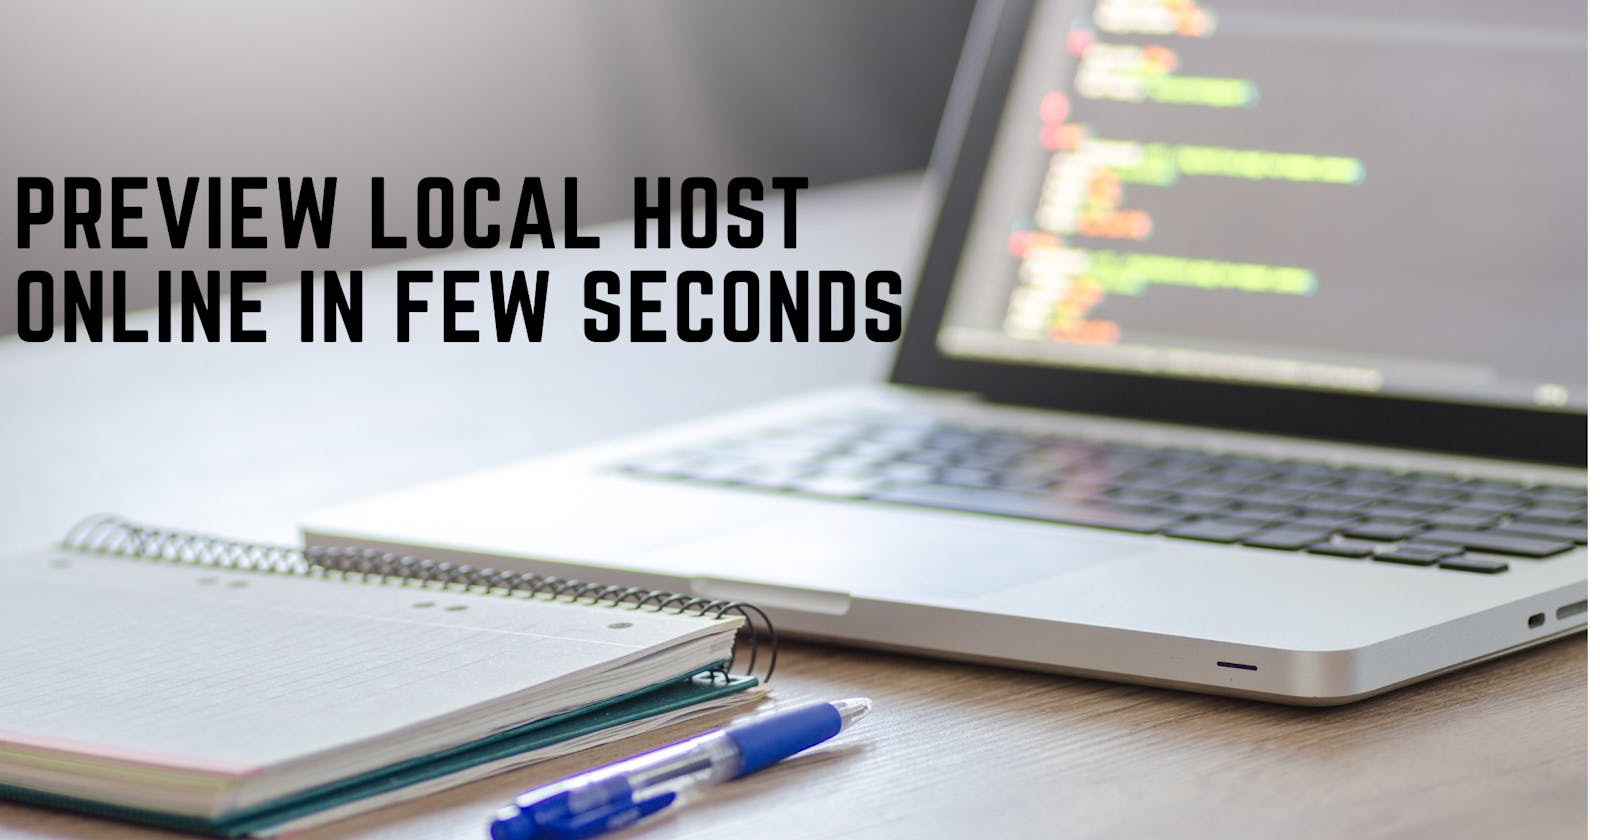 Preview Your Localhost on the Internet in Few Seconds